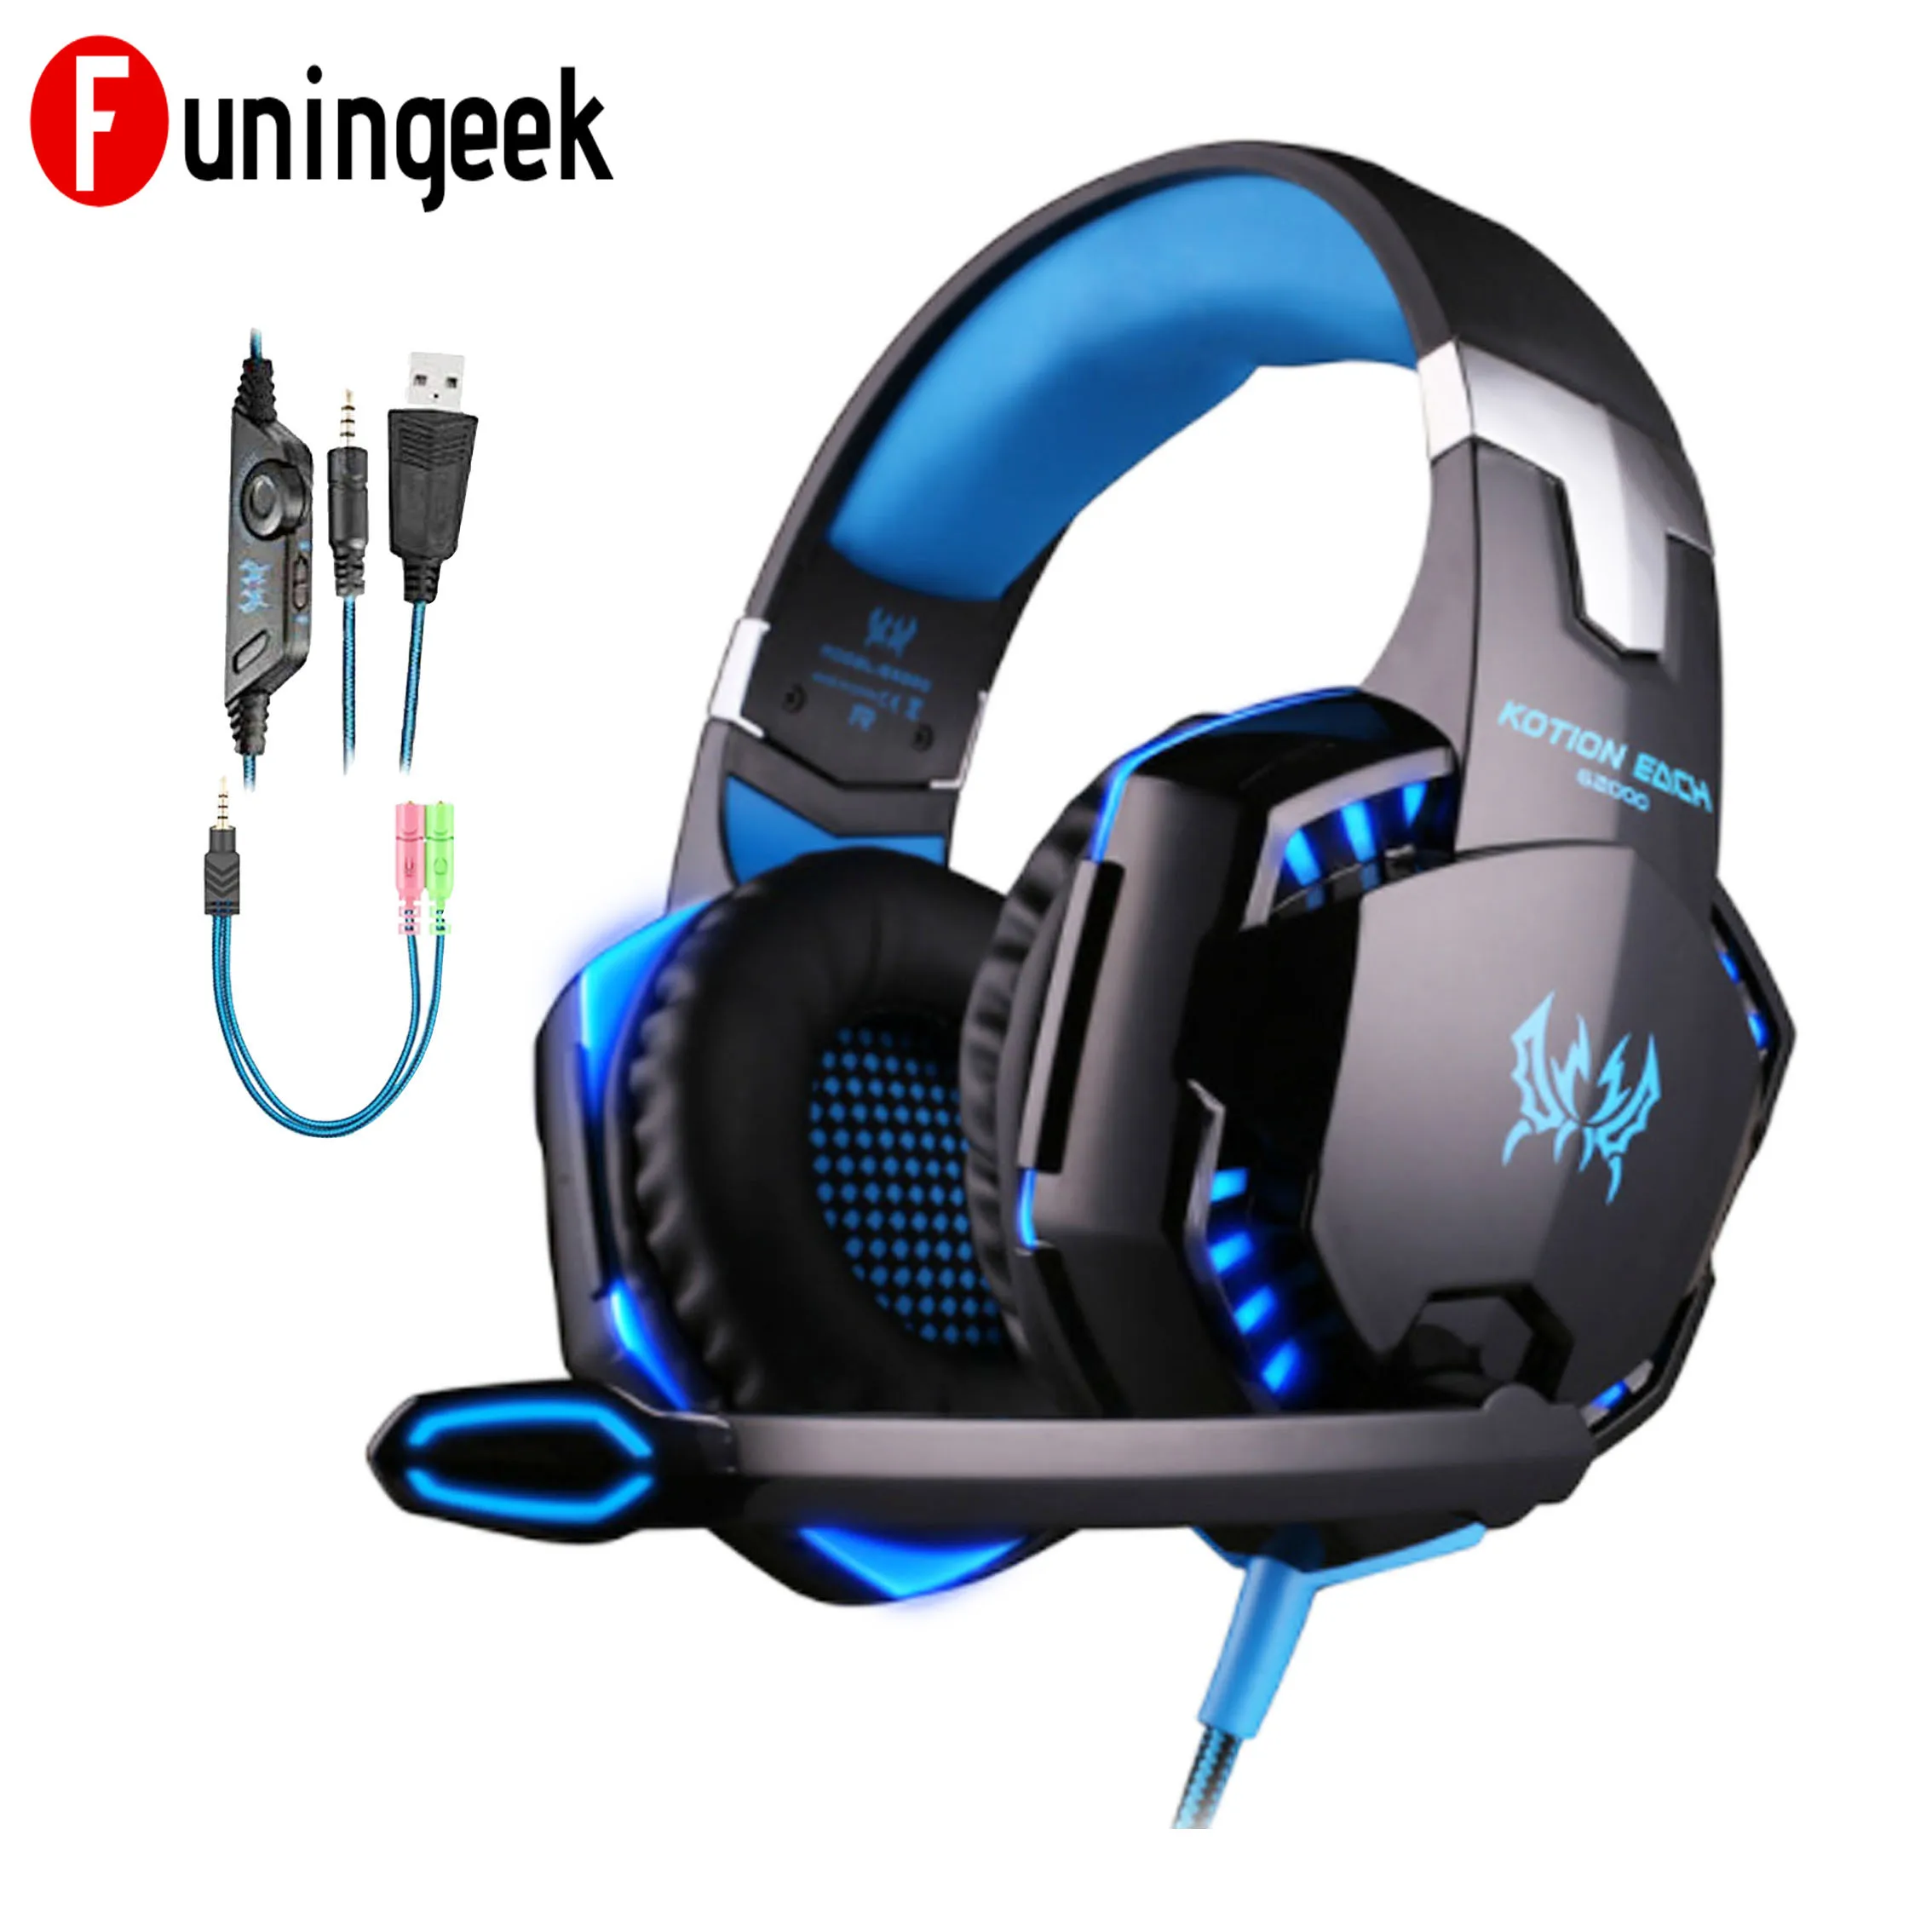 

G2000 G9000 Gaming Headset PS4 with Noise Canceling Mic Xbox One Gamer Headphones PC Wired LED Stereo Bass Adjustable Mic 3.5mm